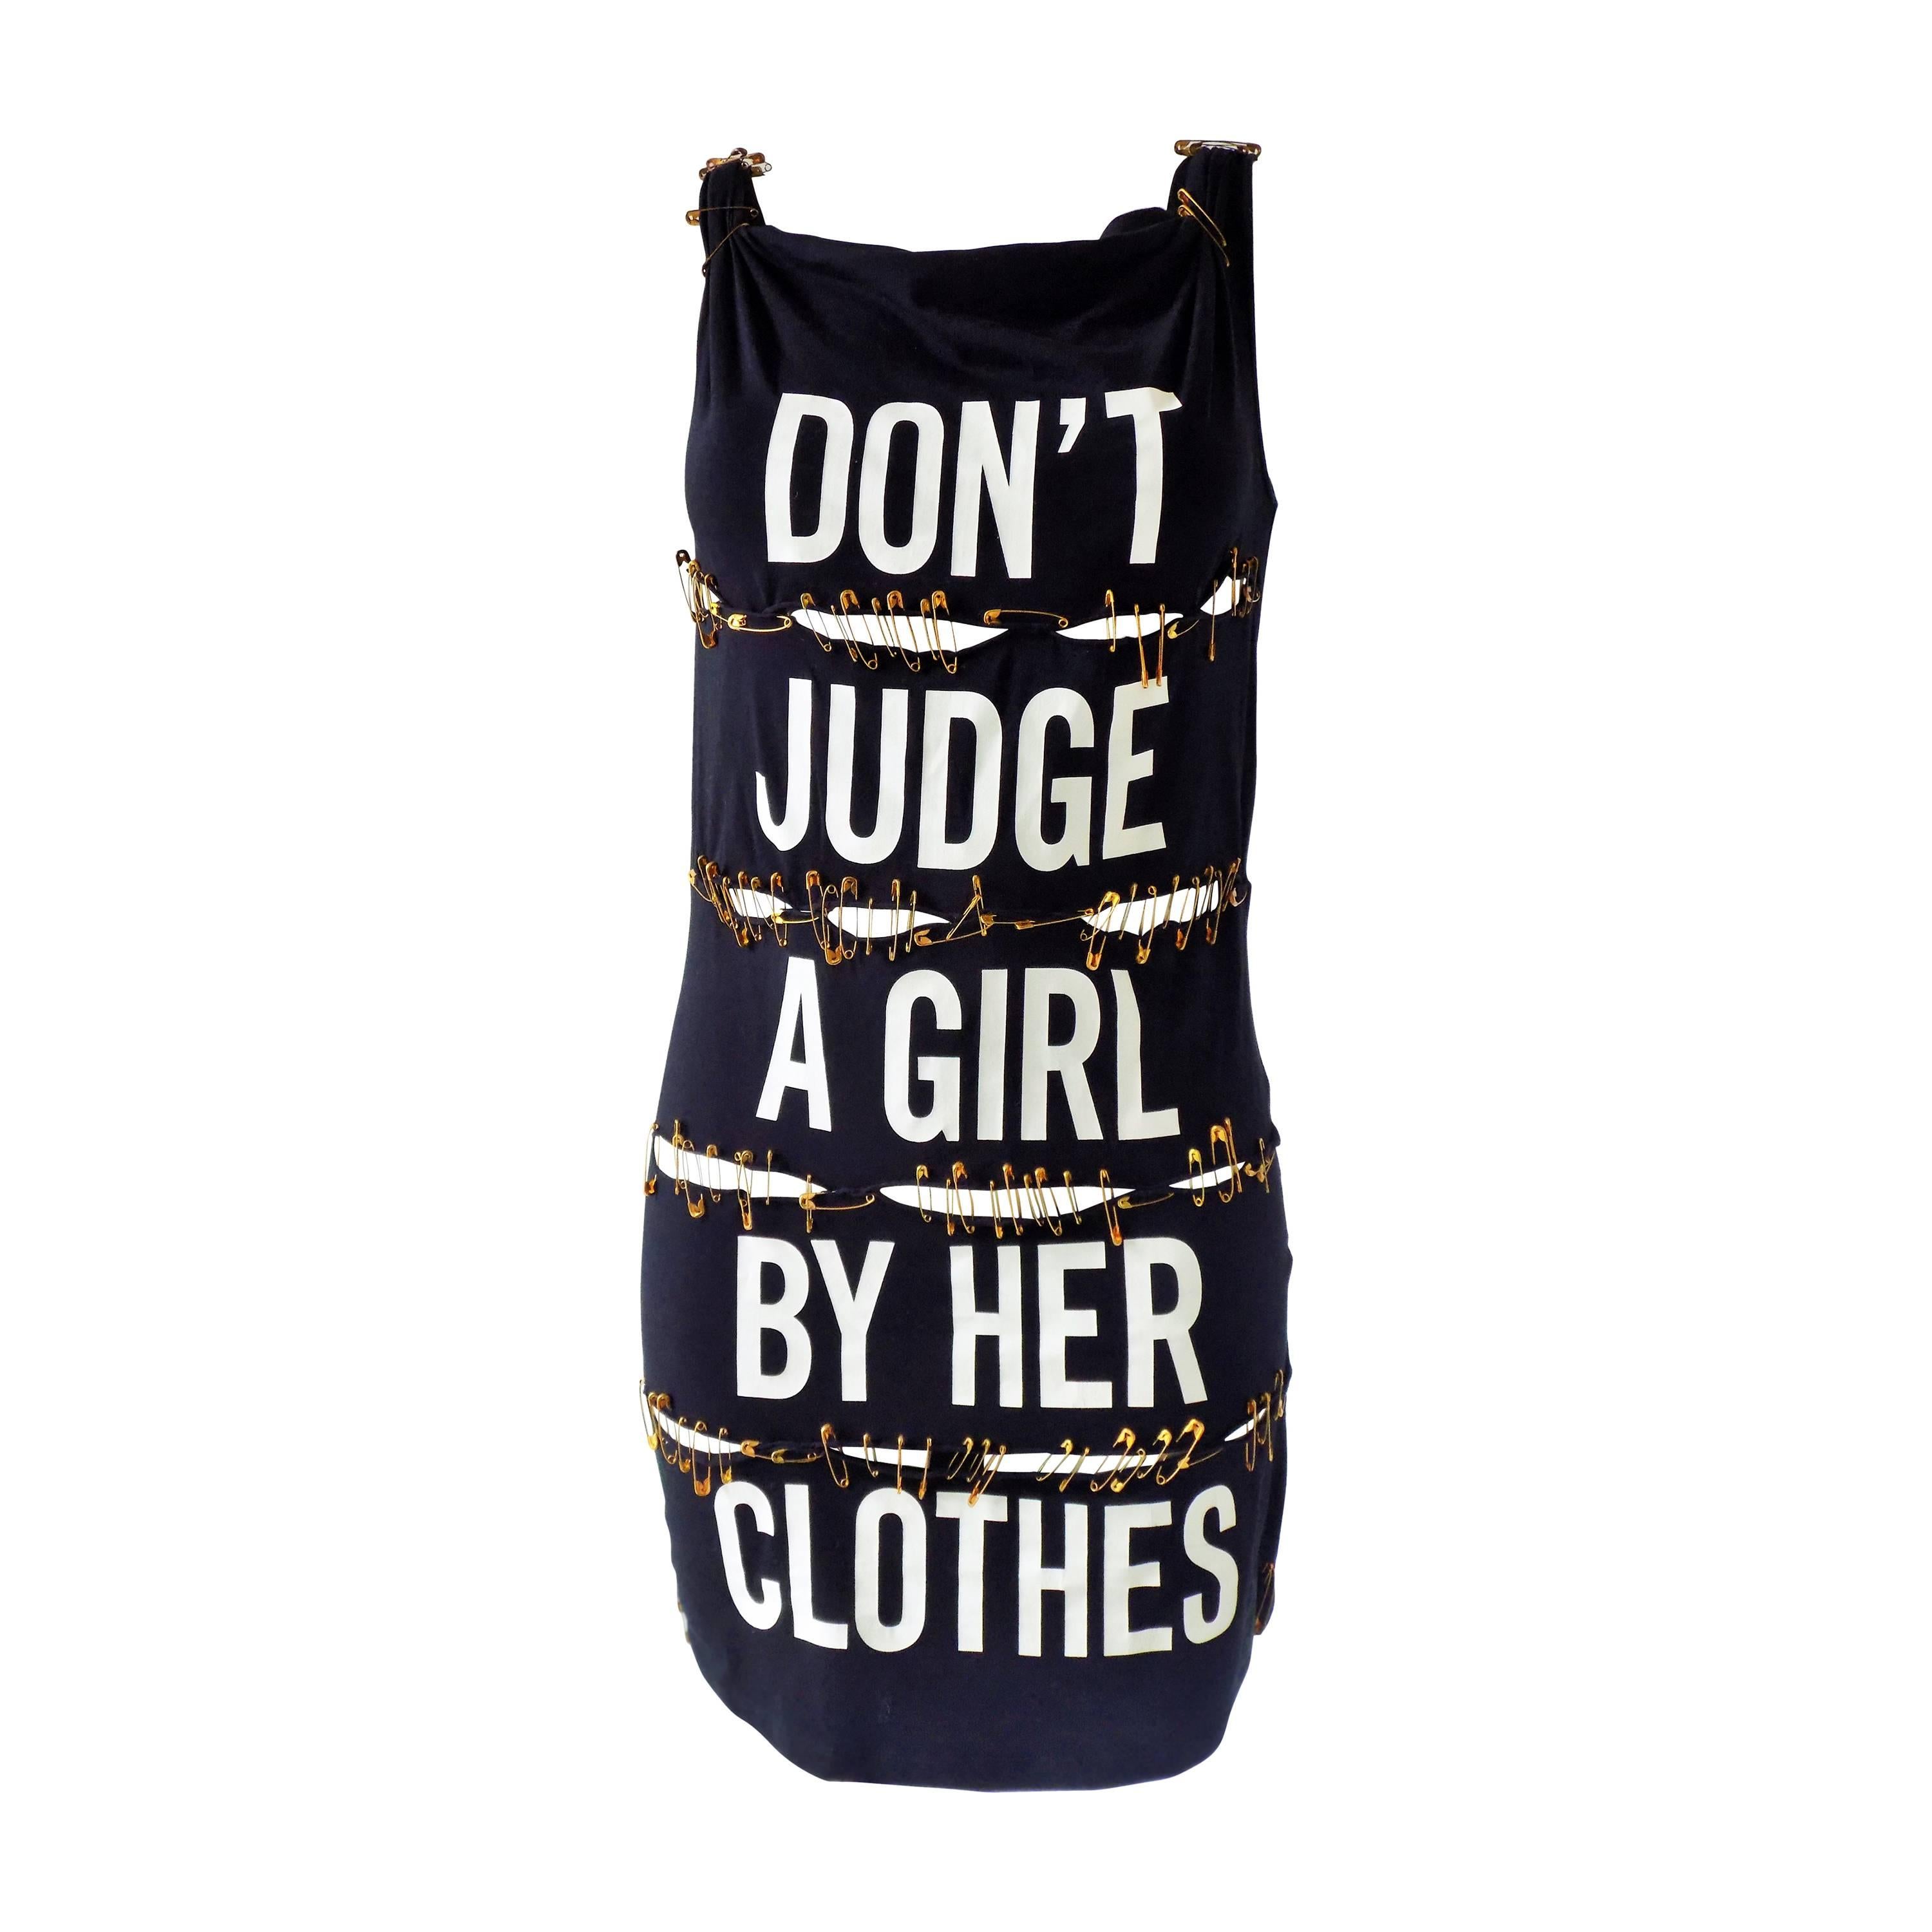 1980s Moschino"Don't judge a girl by her clothes" 